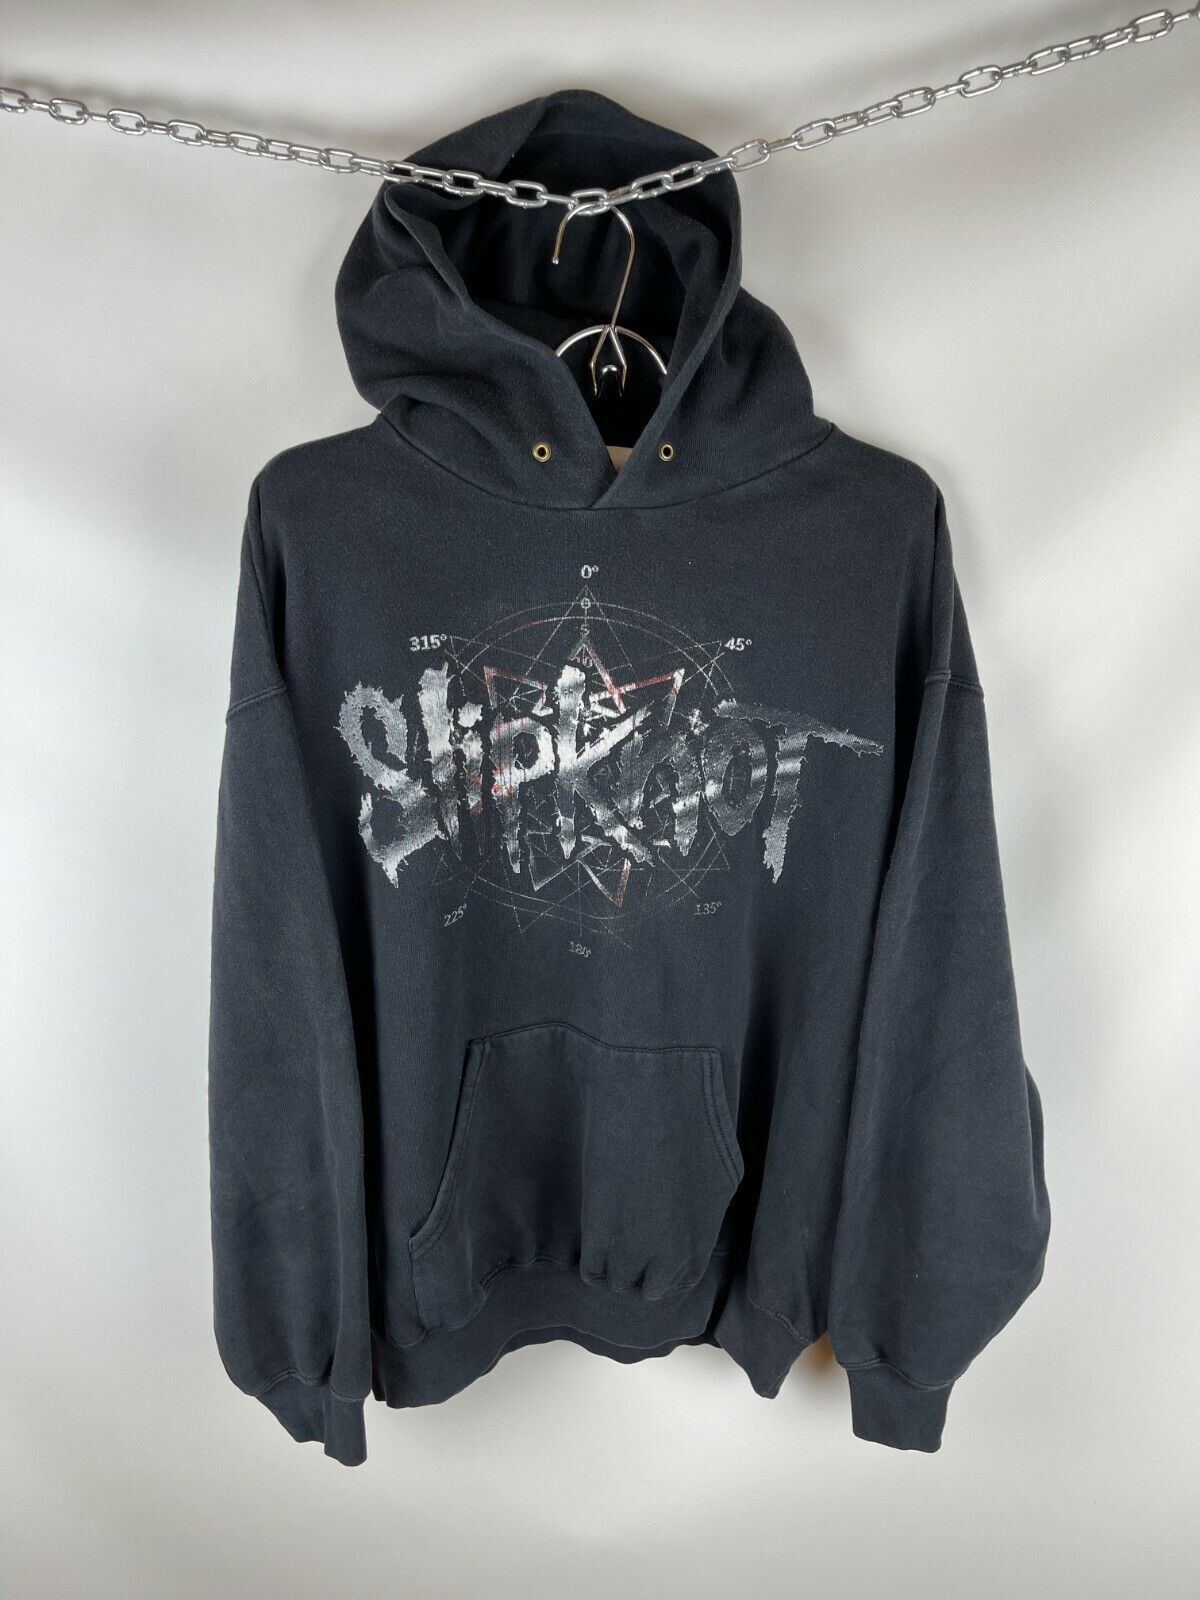 New mail order Vintage Slipknot des Moines Max 47% OFF Iowa 2013 band hoodie